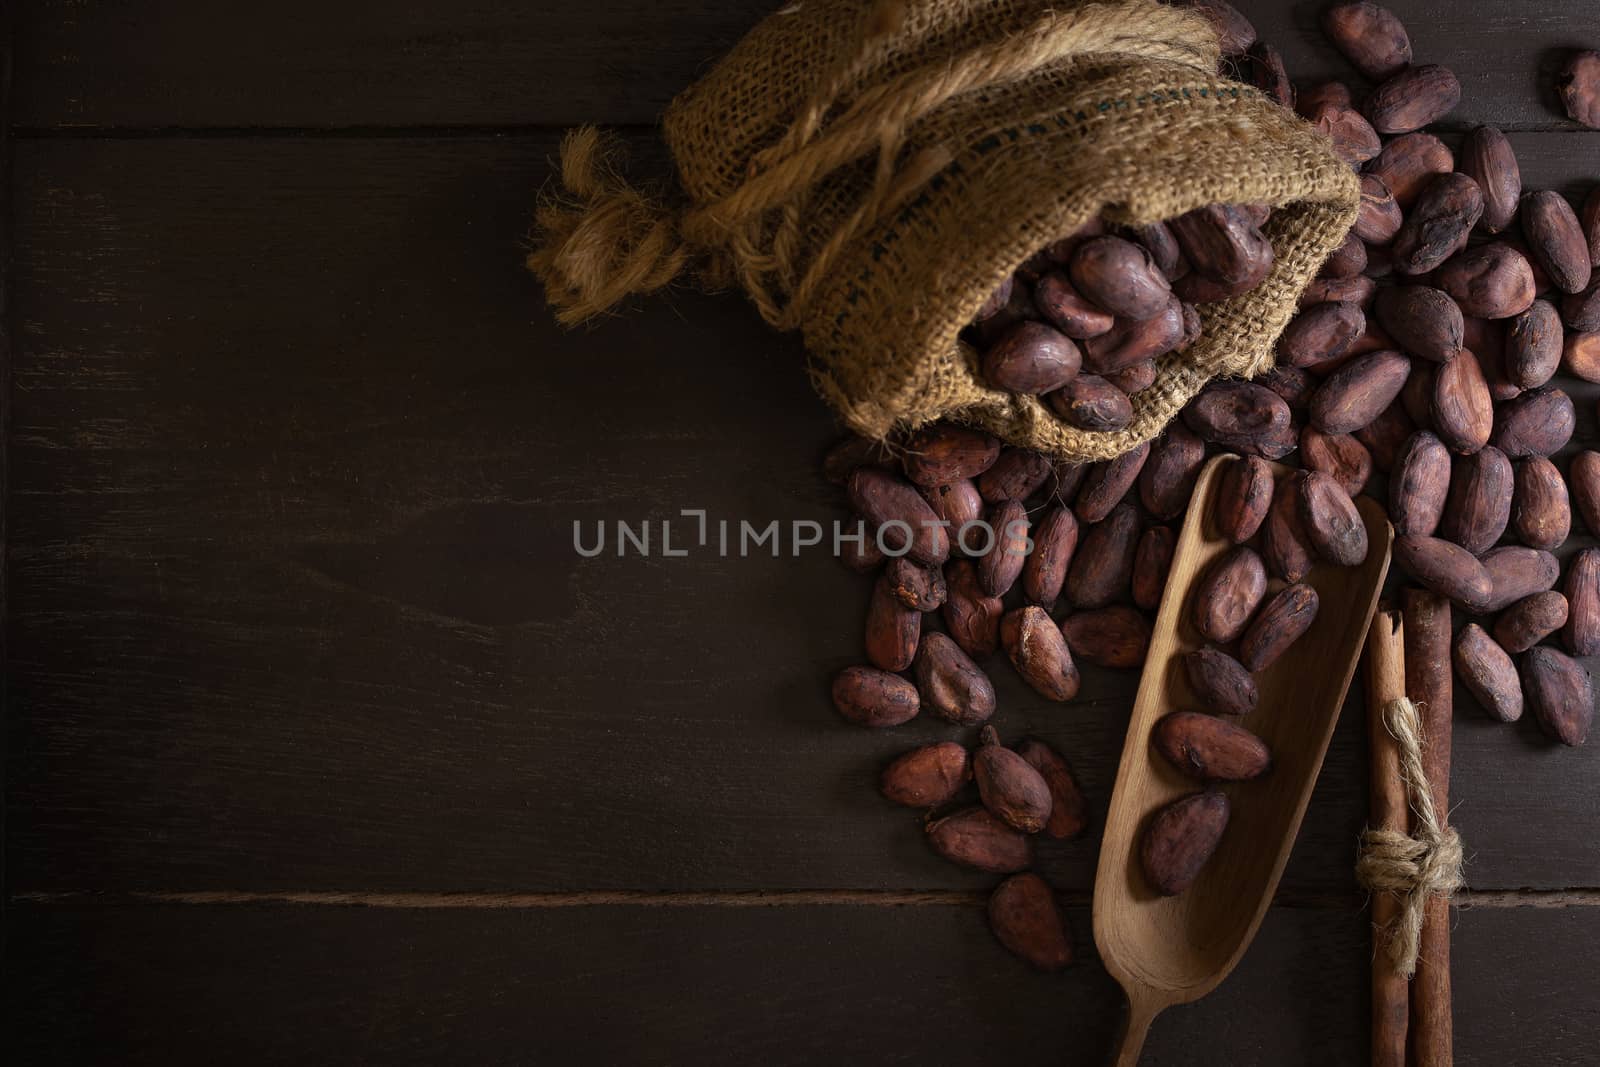 Top view of Cocoa beans in vintage table on dark background.